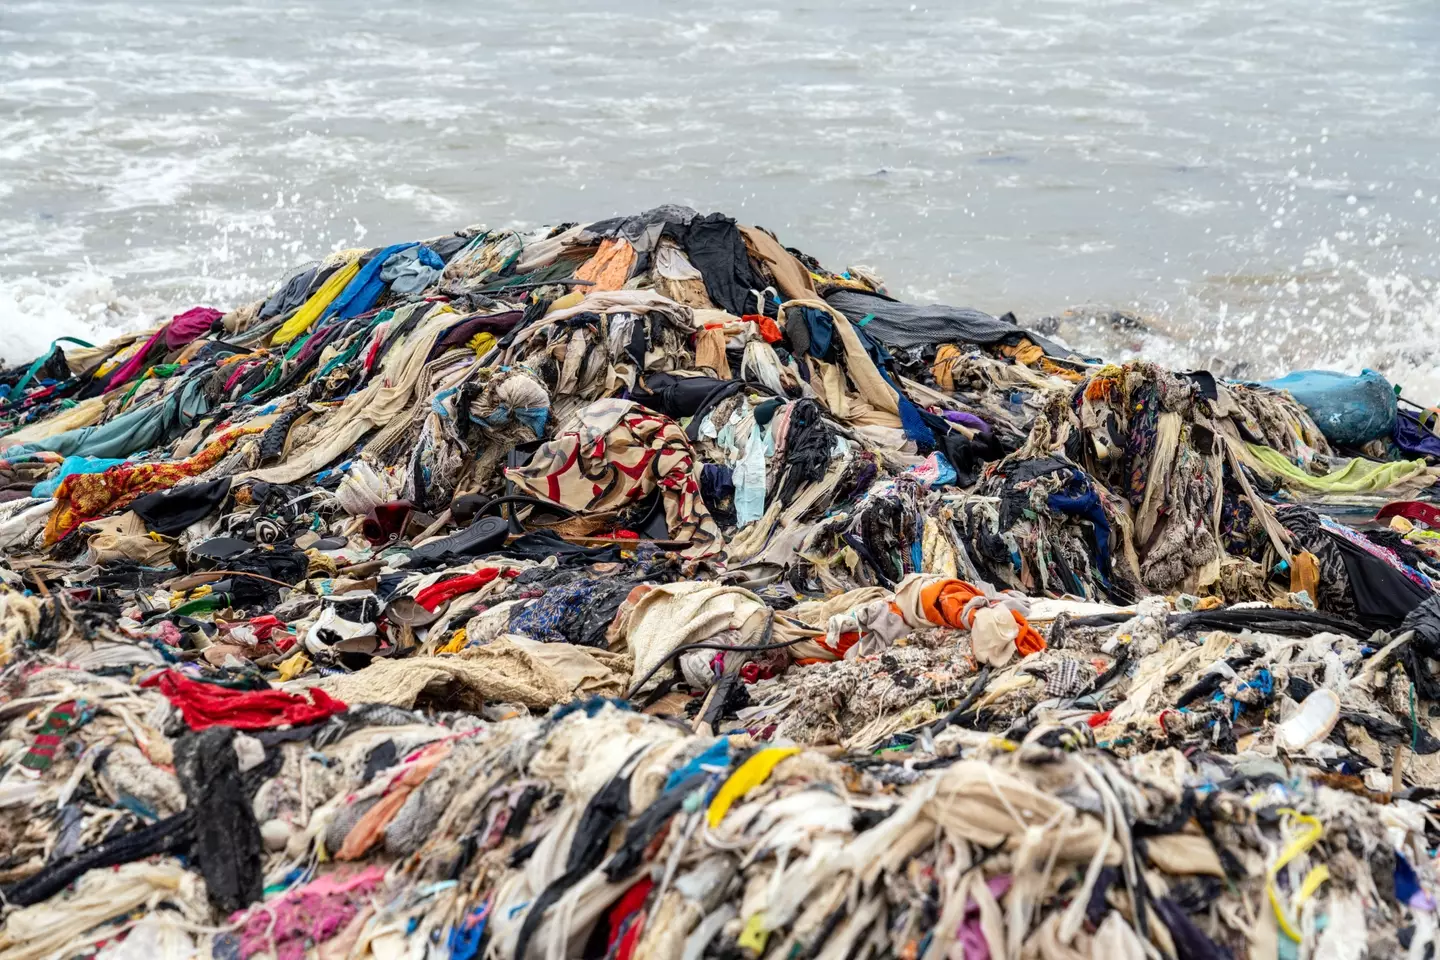 A mountain of unwanted clothes is clogging up the beaches of Ghana's capital city.